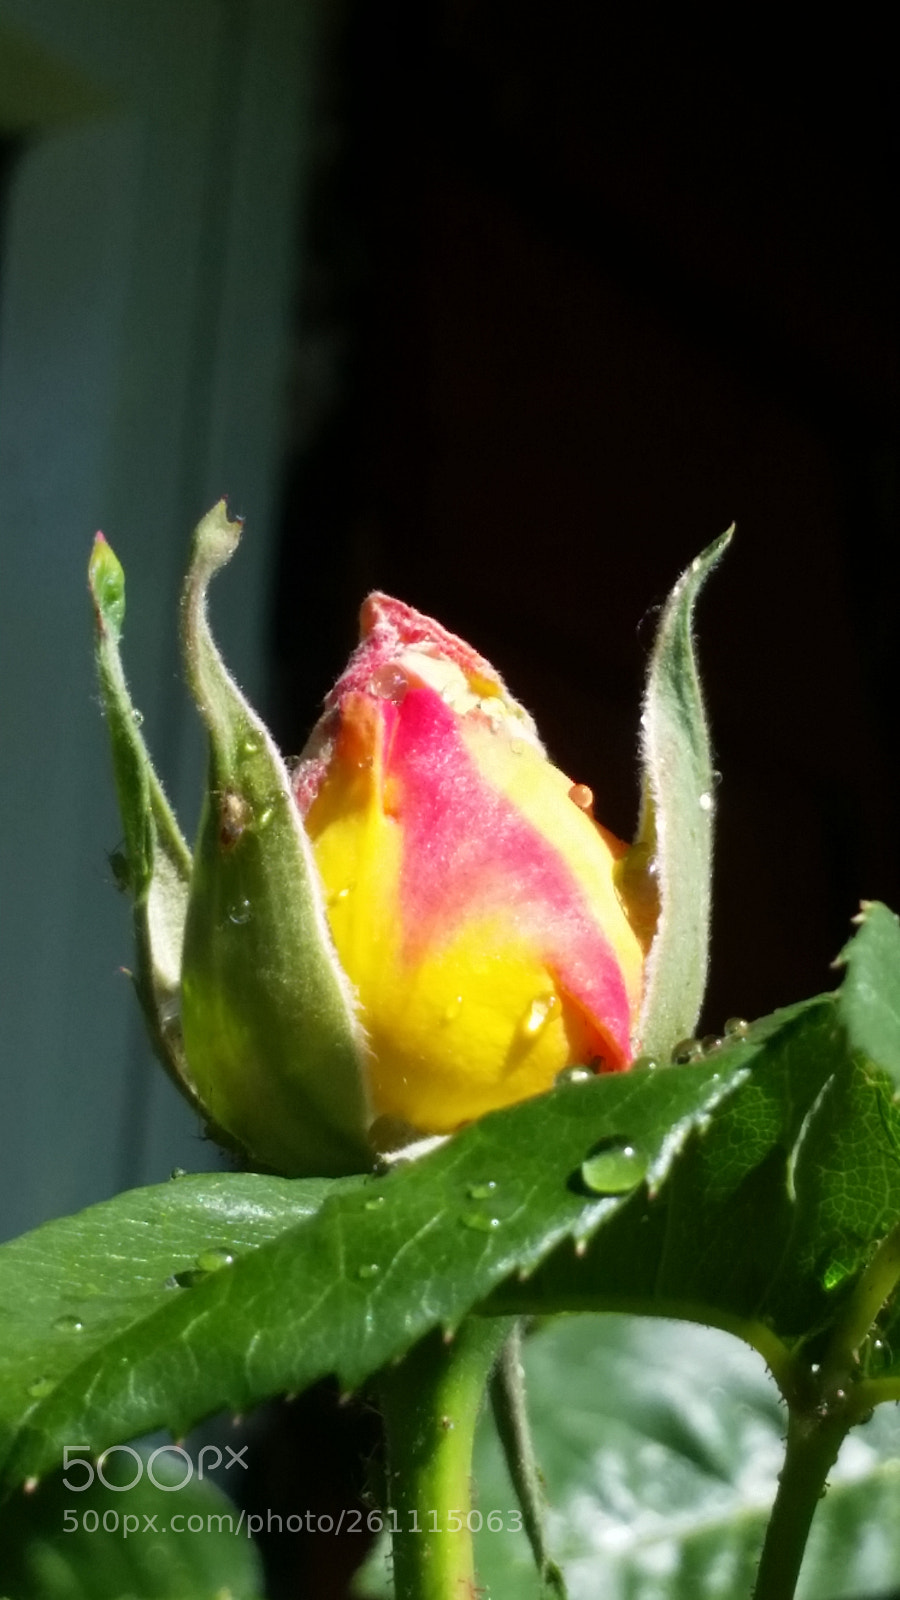 Samsung Galaxy S5 sample photo. The rose photography